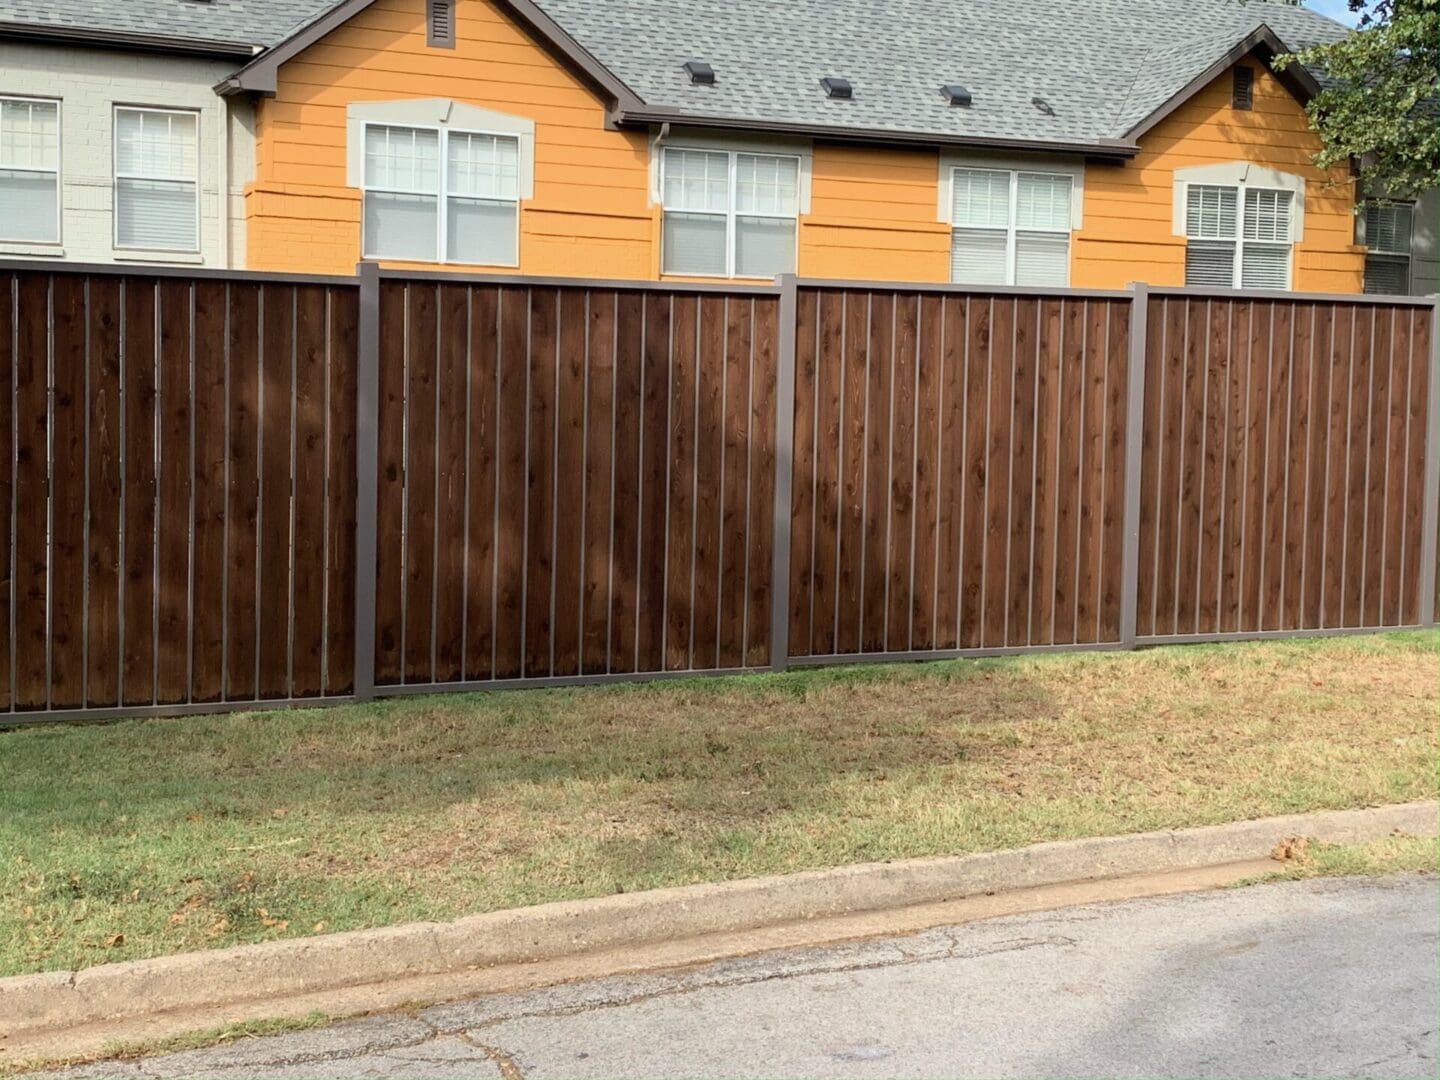 A brown fence with houses in the background